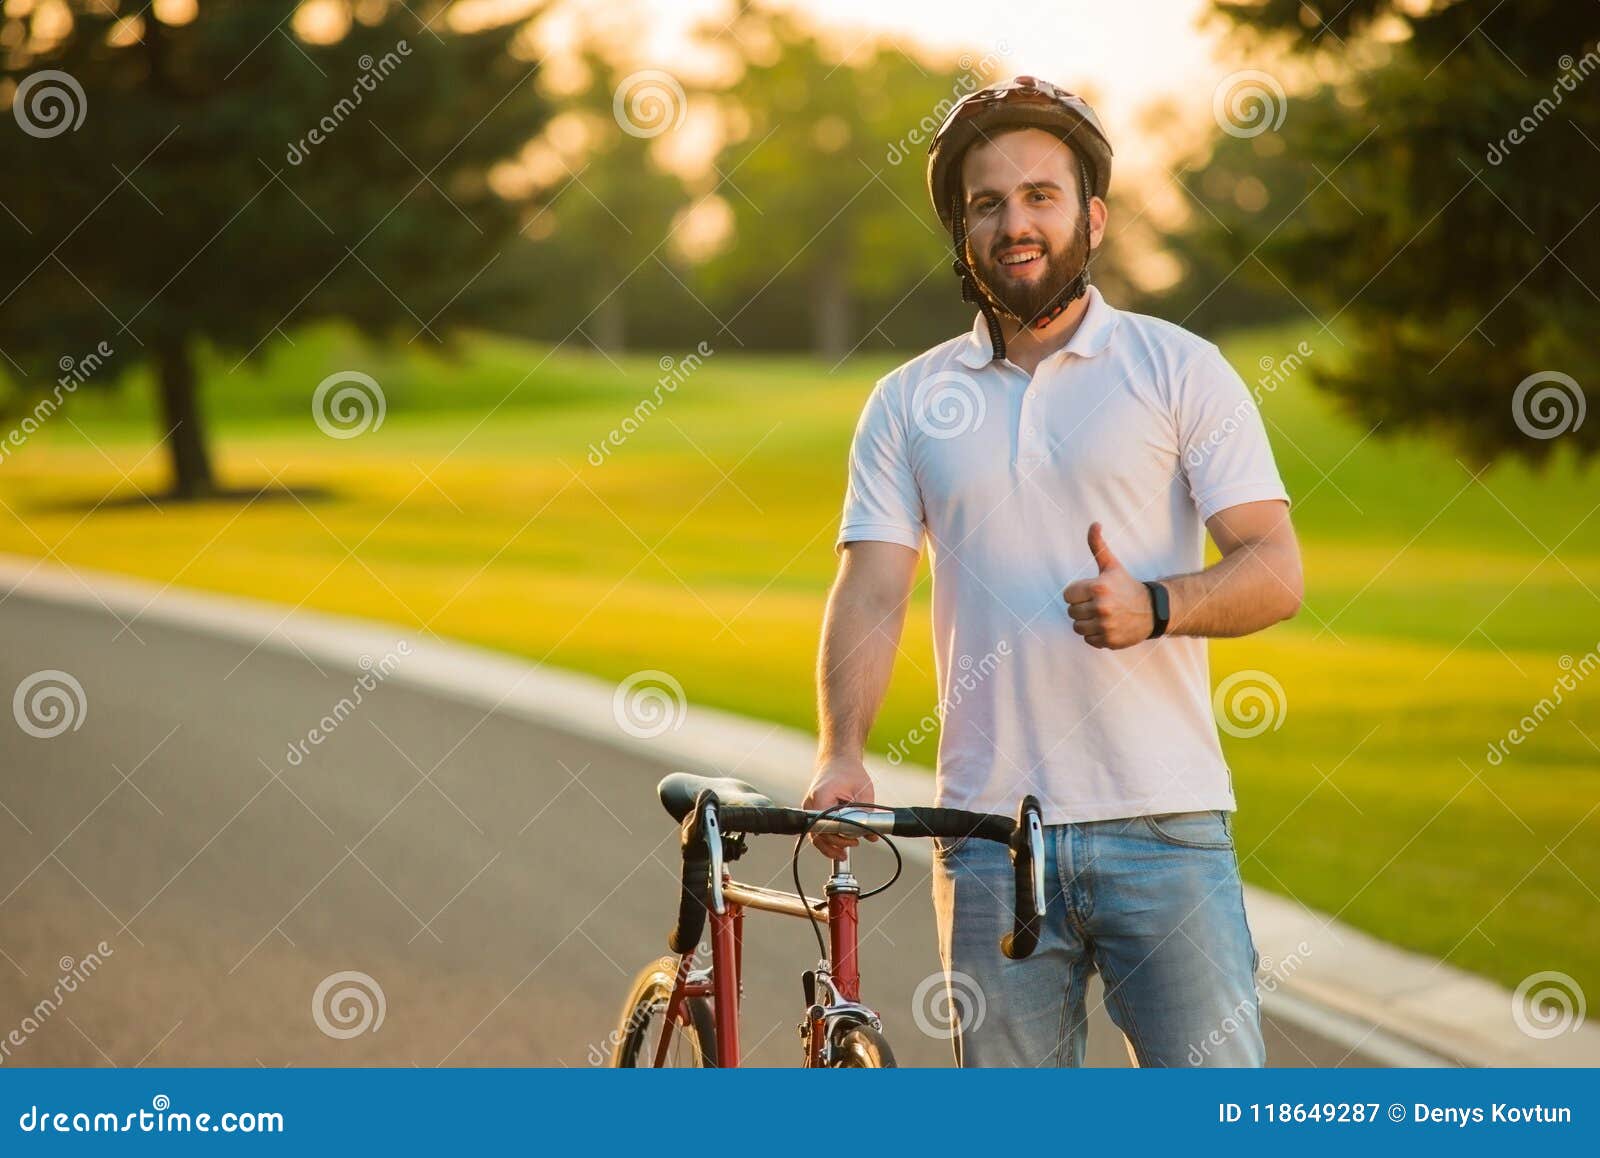 Portrait of Happy Handsome Guy with Bicycle. Stock Image - Portrait Happy HanDsome Guy Bicycle Portrait Happy HanDsome Guy Bicycle Cute Young Smiling Cyclist Giving Thumb Up 118649287